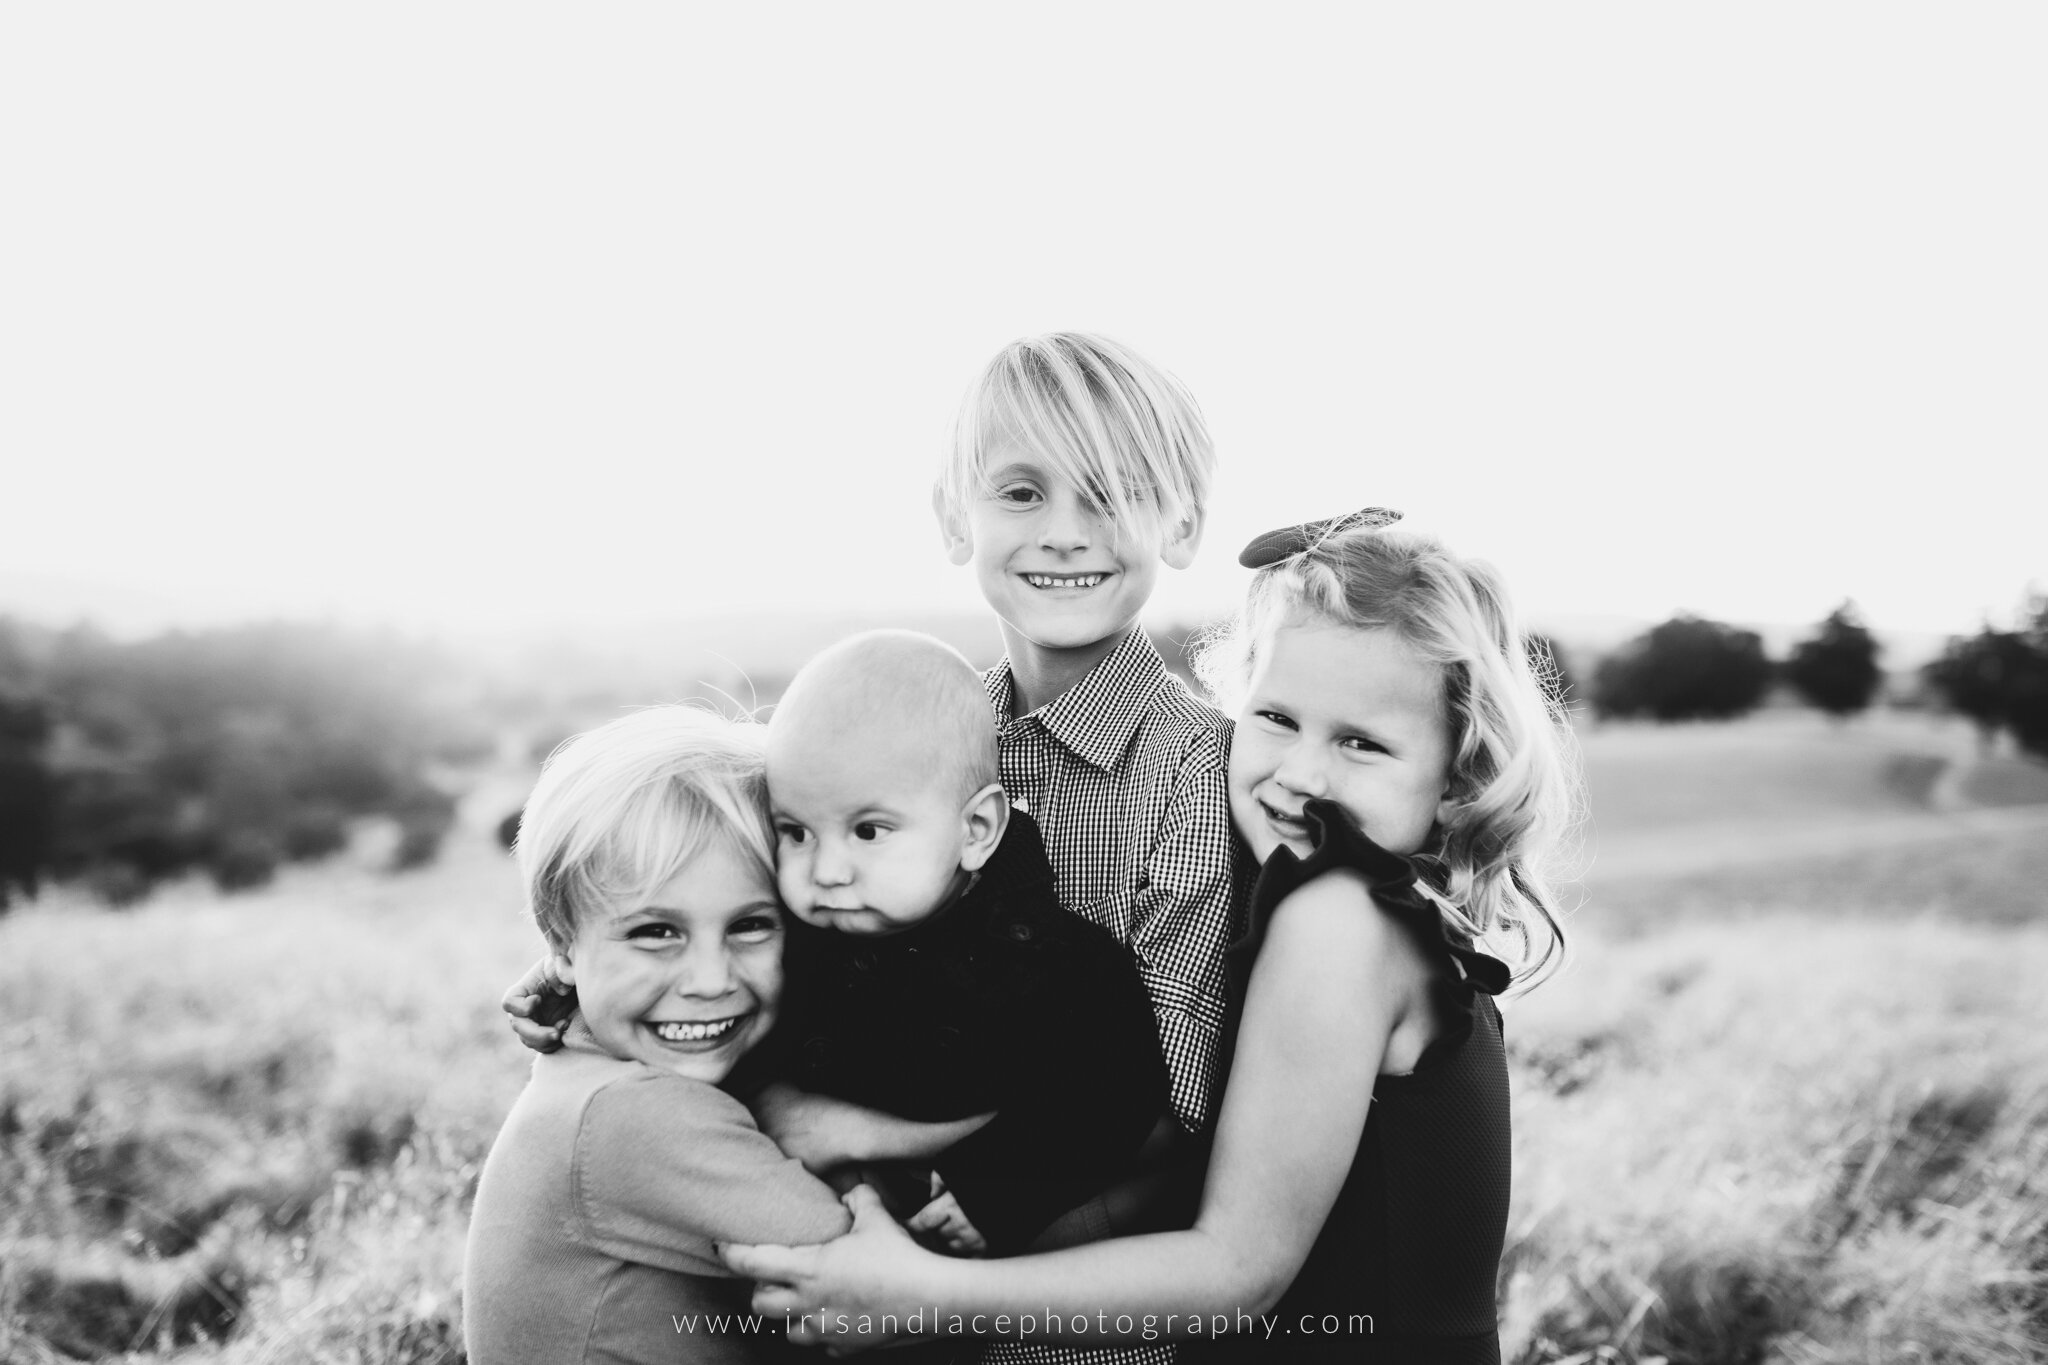 Northern California Family Pictures at Sunset   |  Iris and Lace Photography